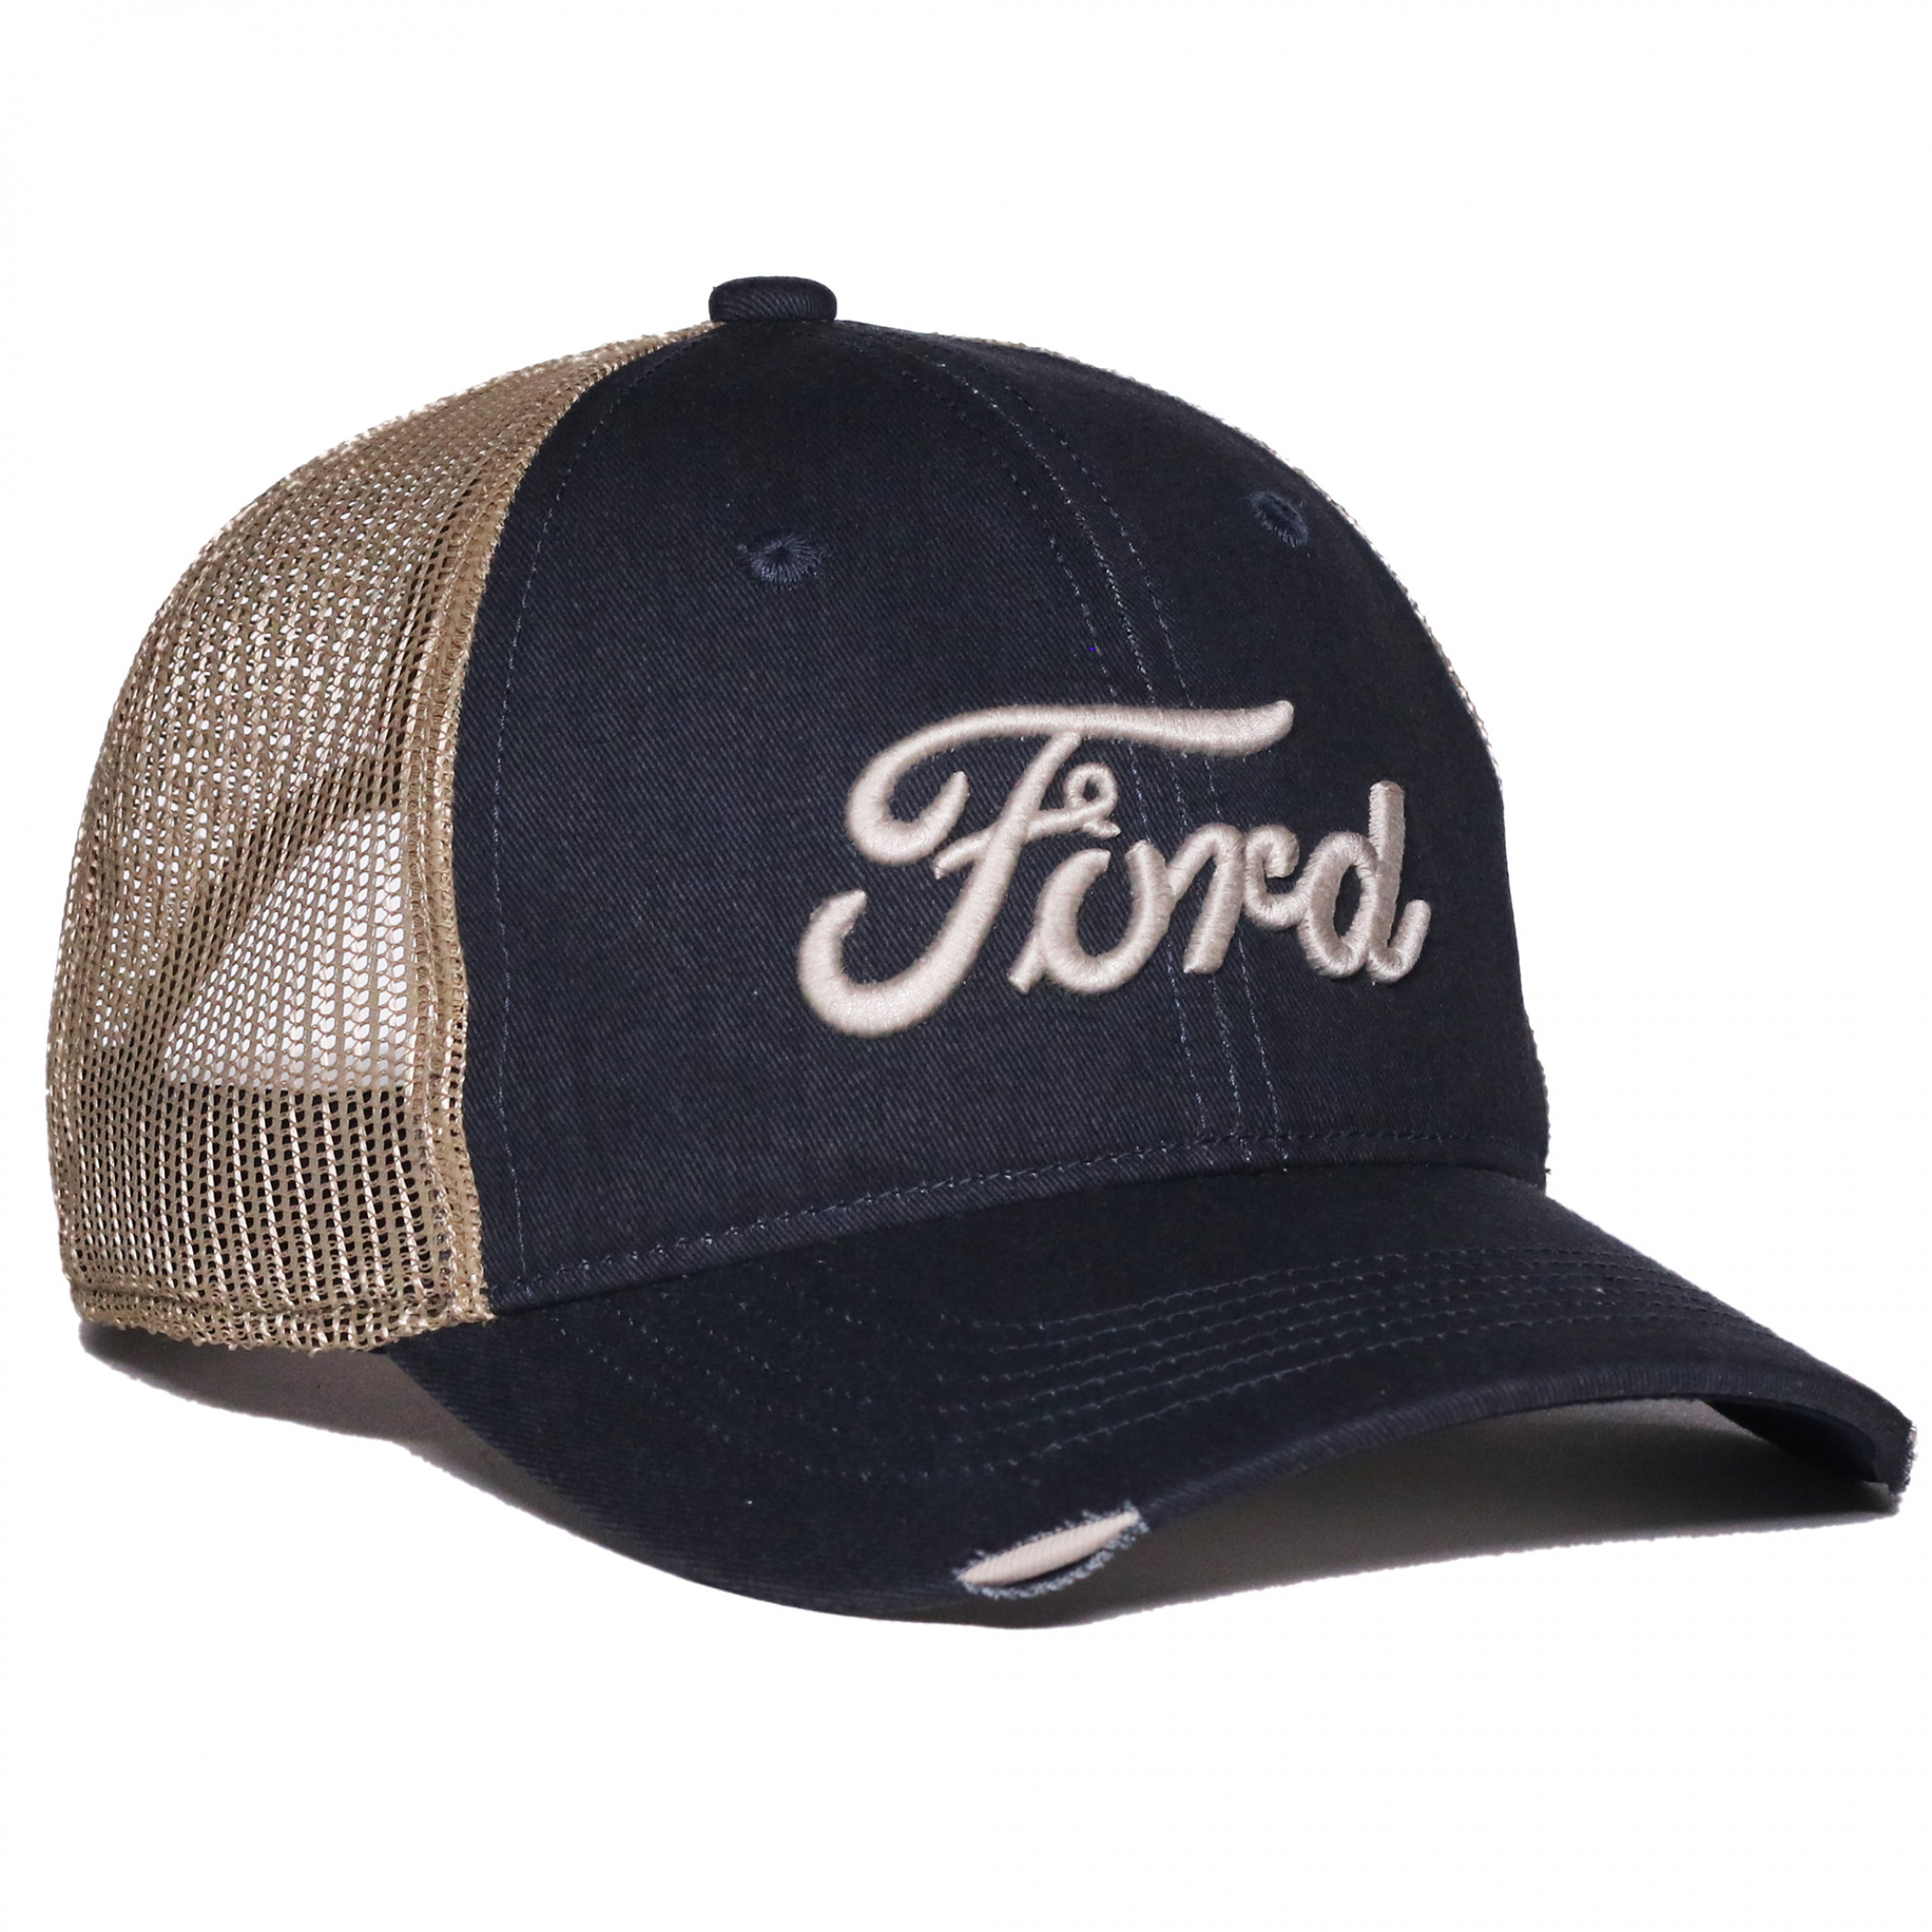 Ford Logo Tea Stained Worn Pre-Curved Adjustable Trucker Hat